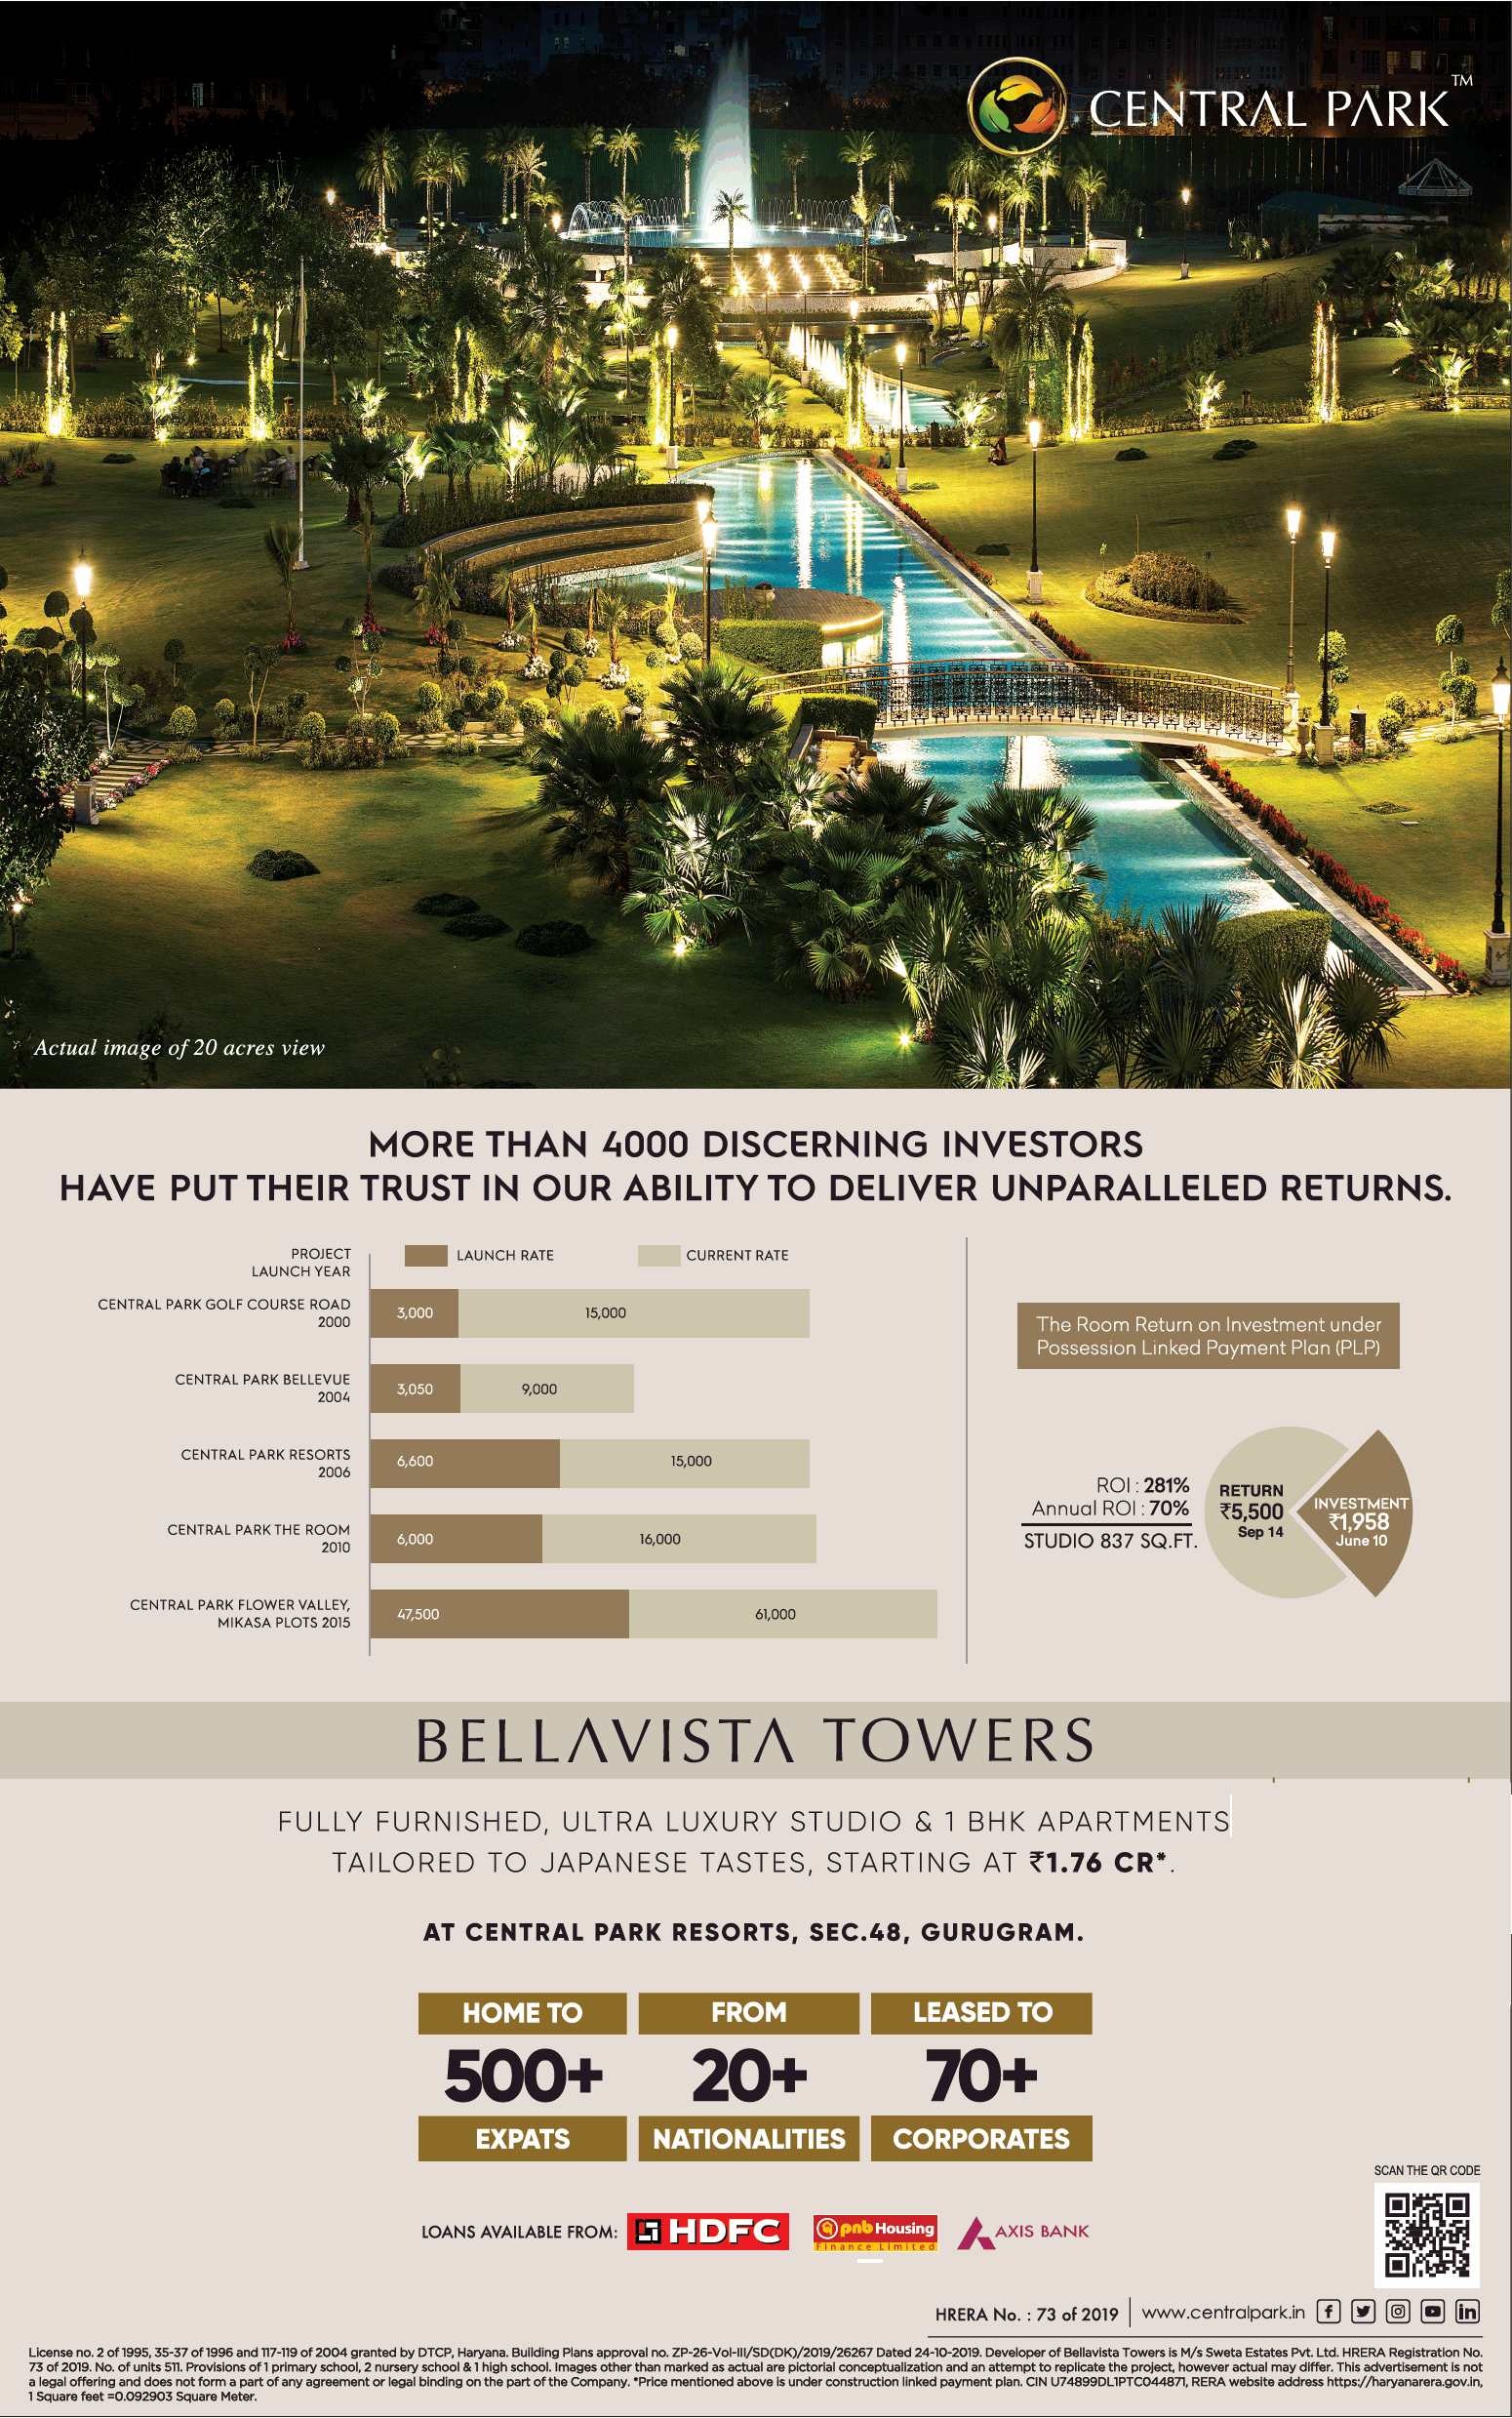 1 BHK apartment starting Rs 1.76 Cr at Central Park Bellavista Towers in Gurgaon